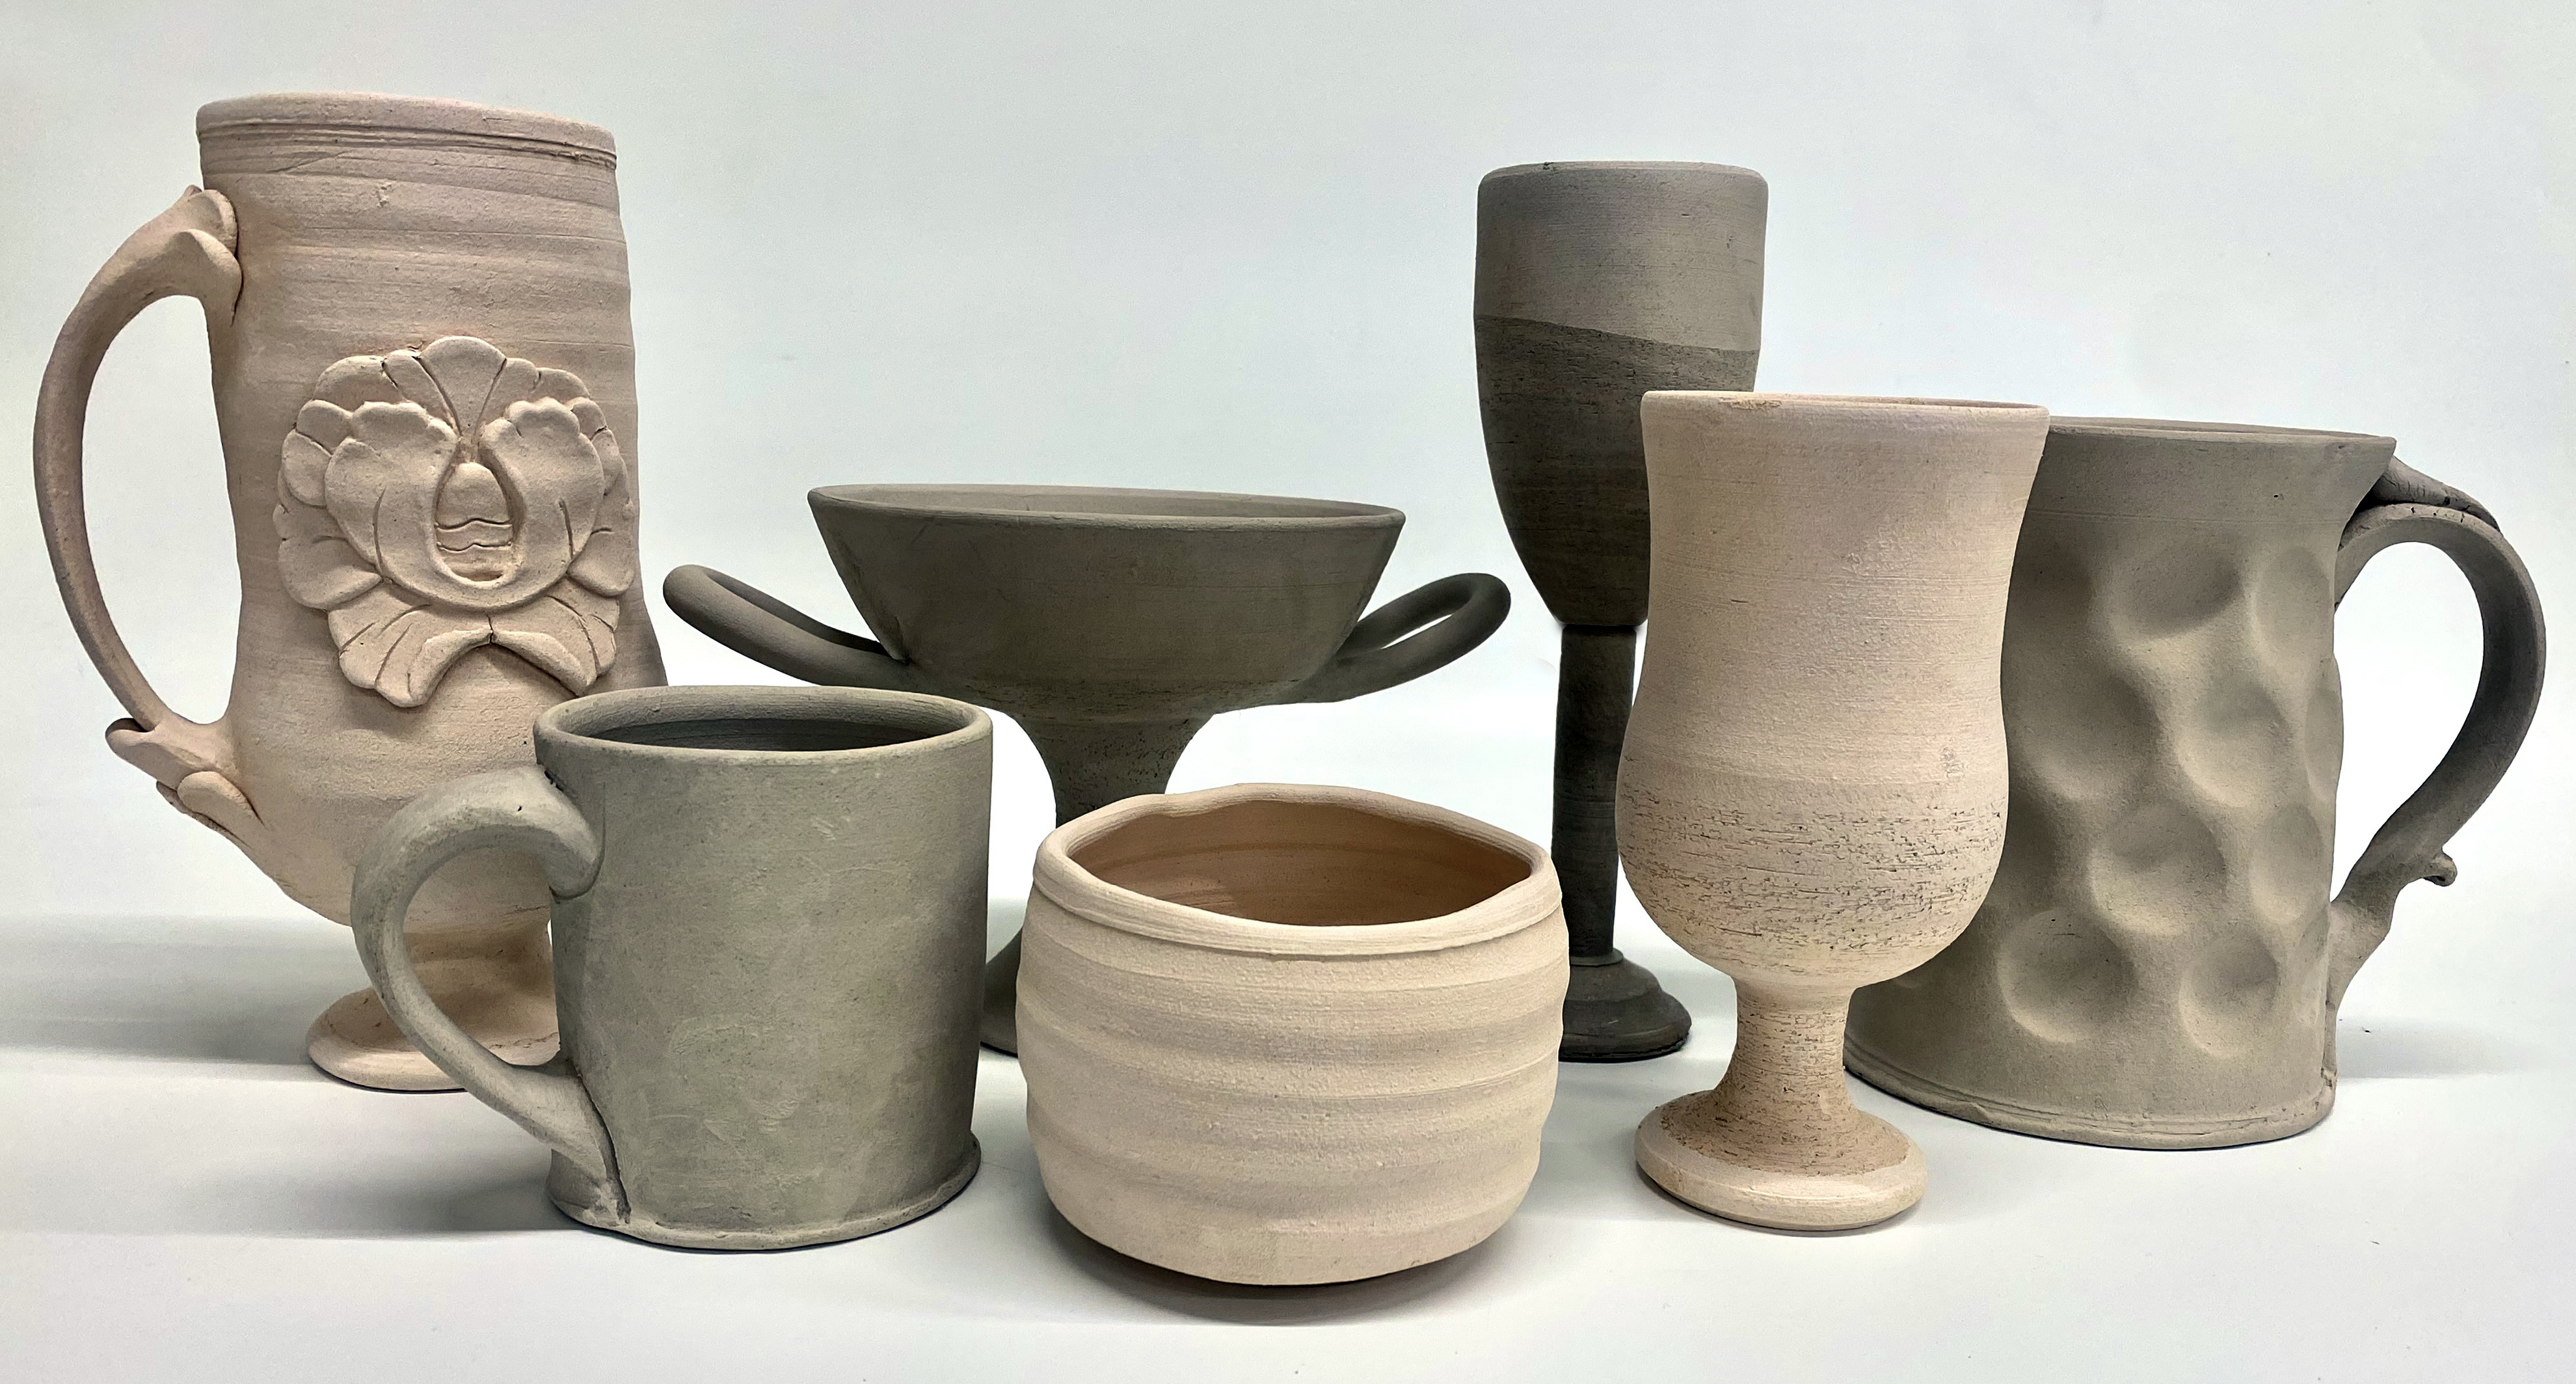 Ceramic cups of various shapes and sizes